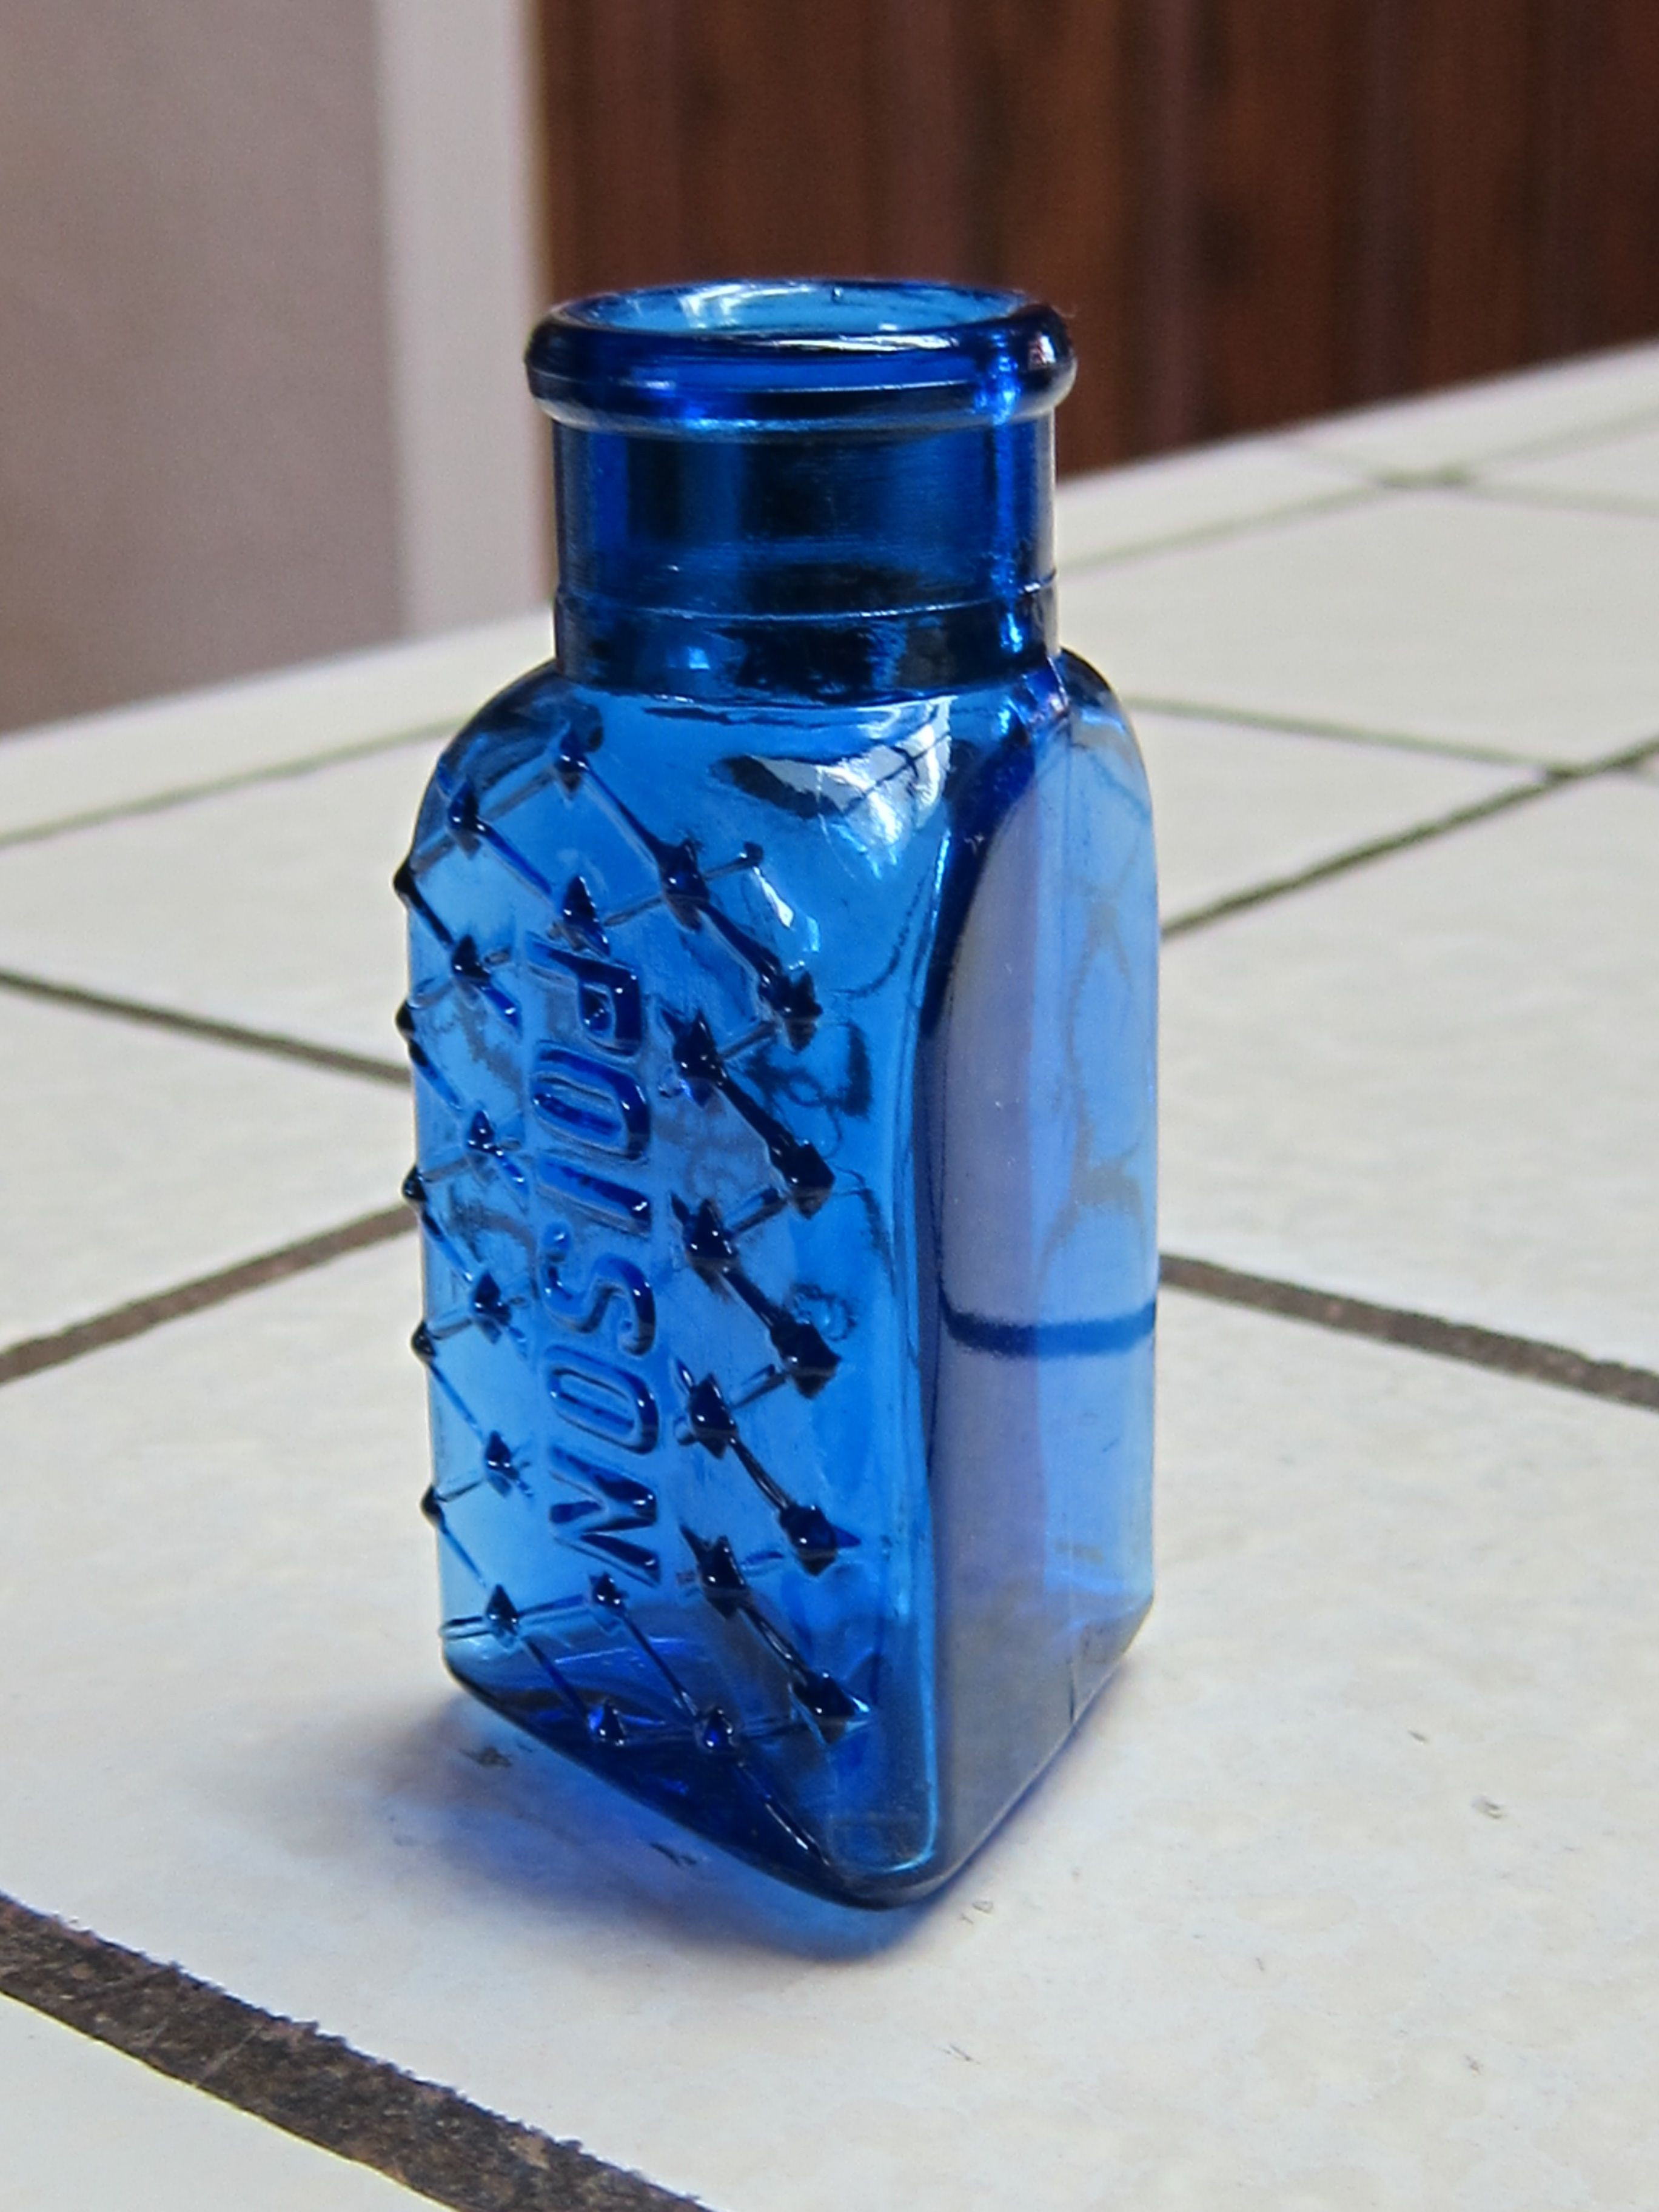 28 Awesome Blue Glass Vases for Sale 2022 free download blue glass vases for sale of colbalt blue poison bottle triangle shaped antiques pinterest within colbalt blue poison bottle triangle shaped